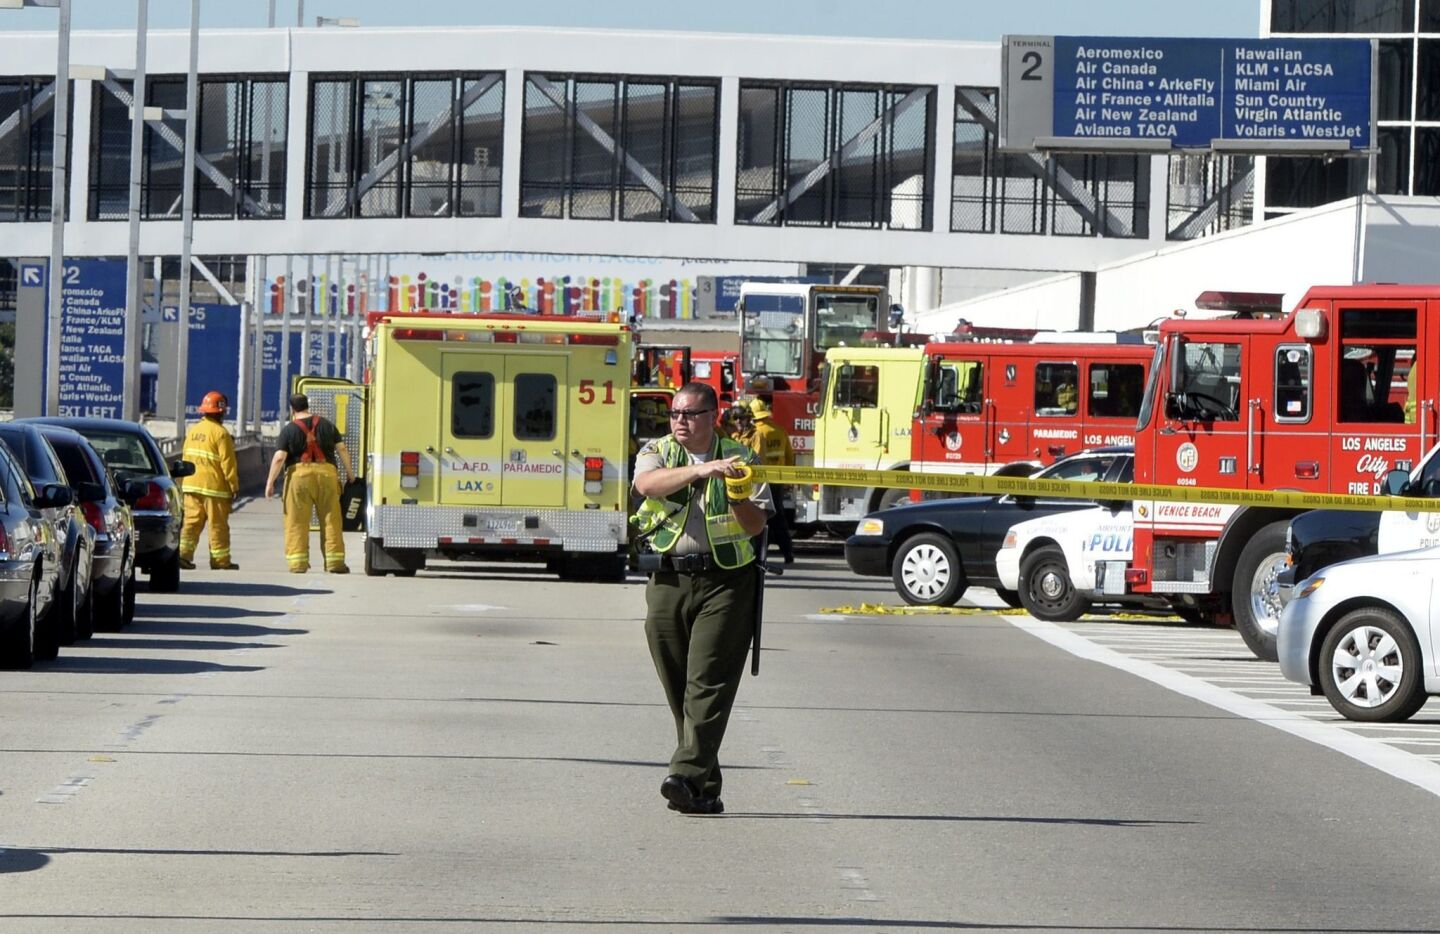 A police offer stretches crime scene tape across the road leading to Terminal 3 after Friday morning's shooting.